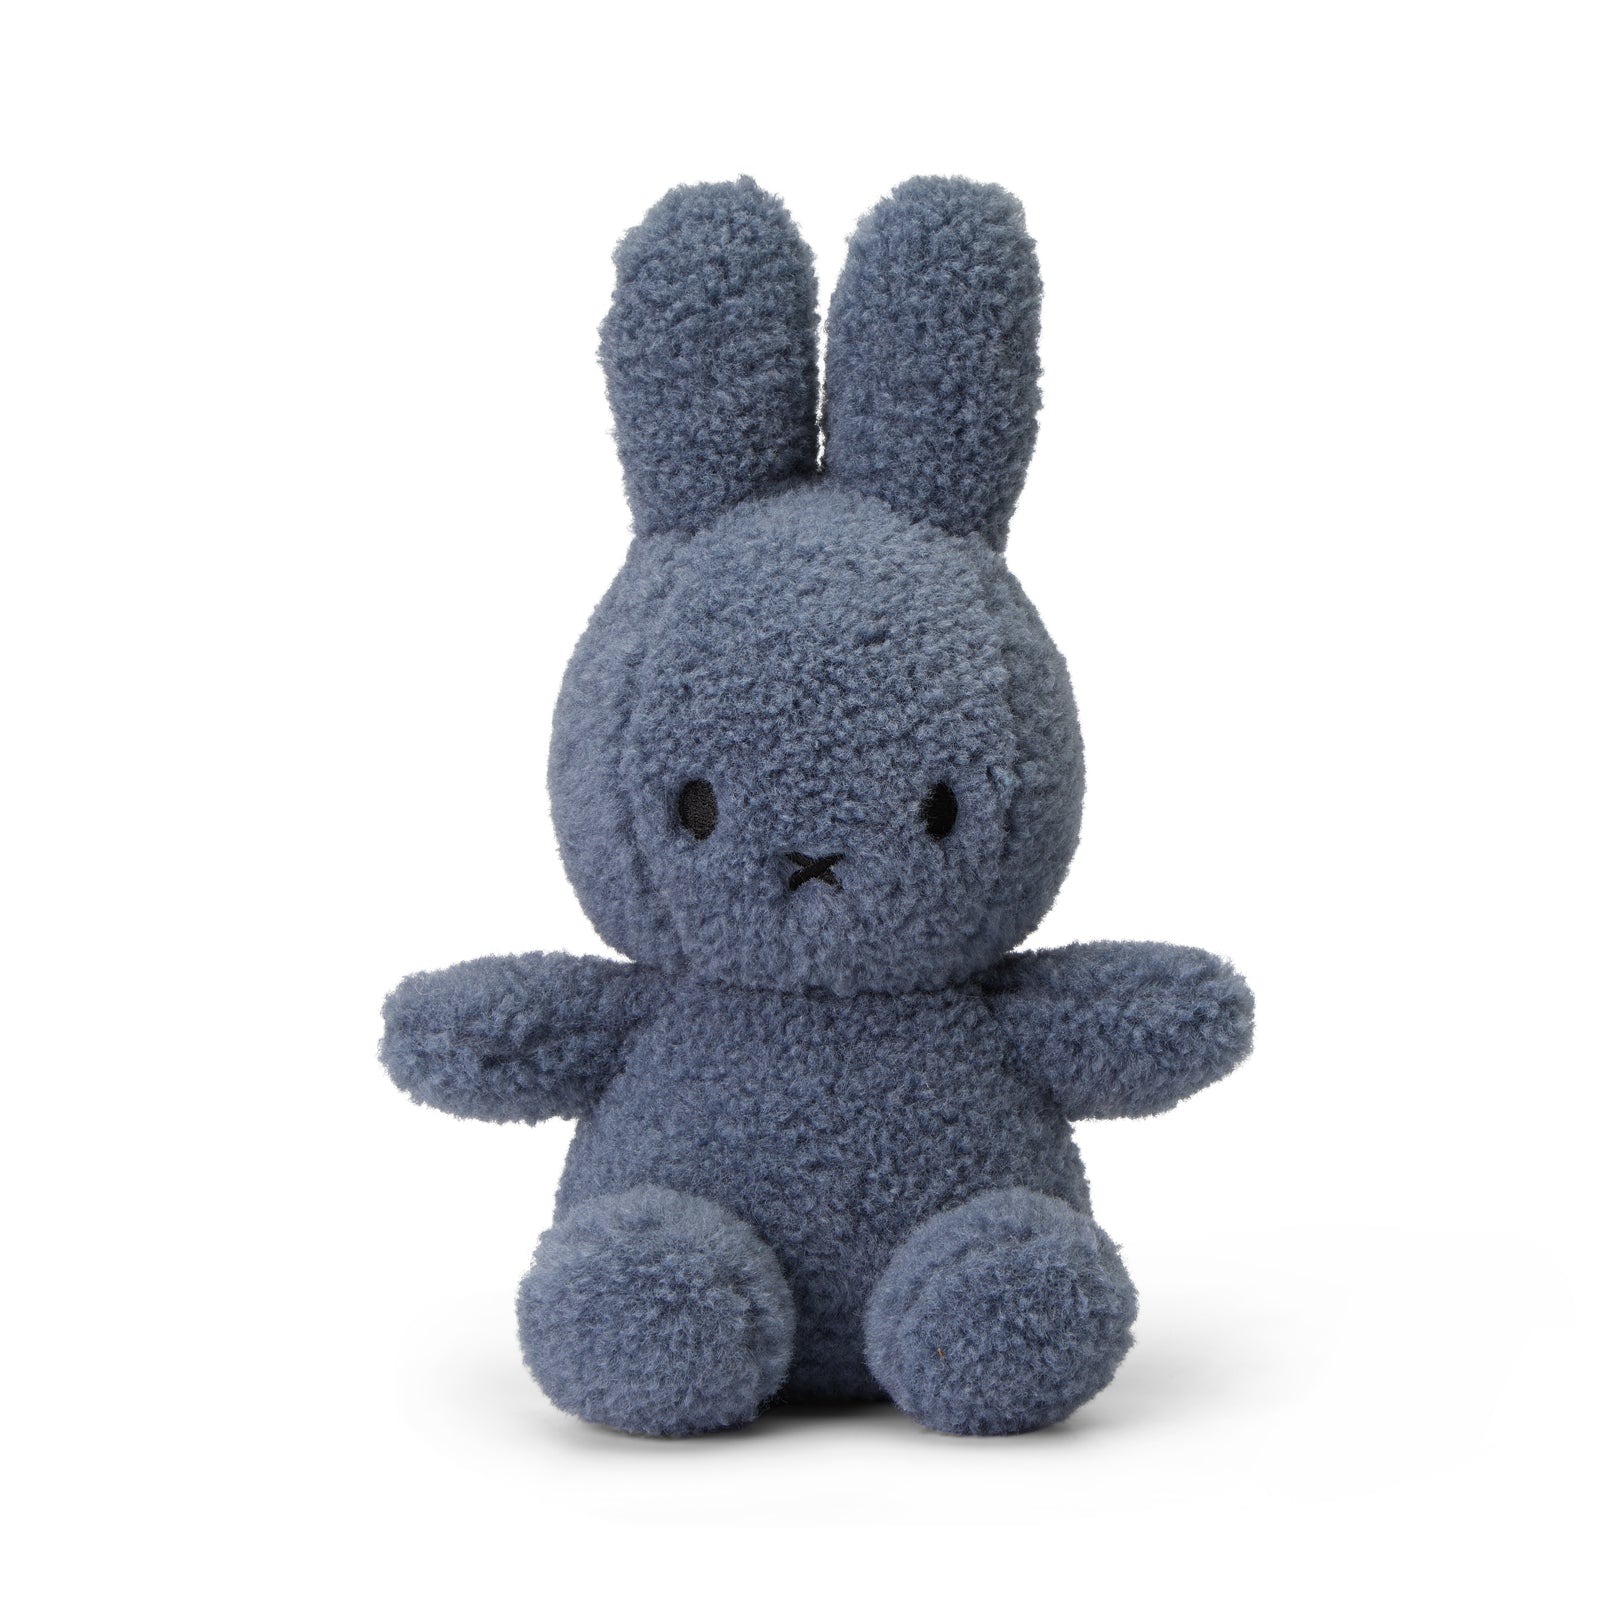 Front view of blue teddy Miffy the rabbit